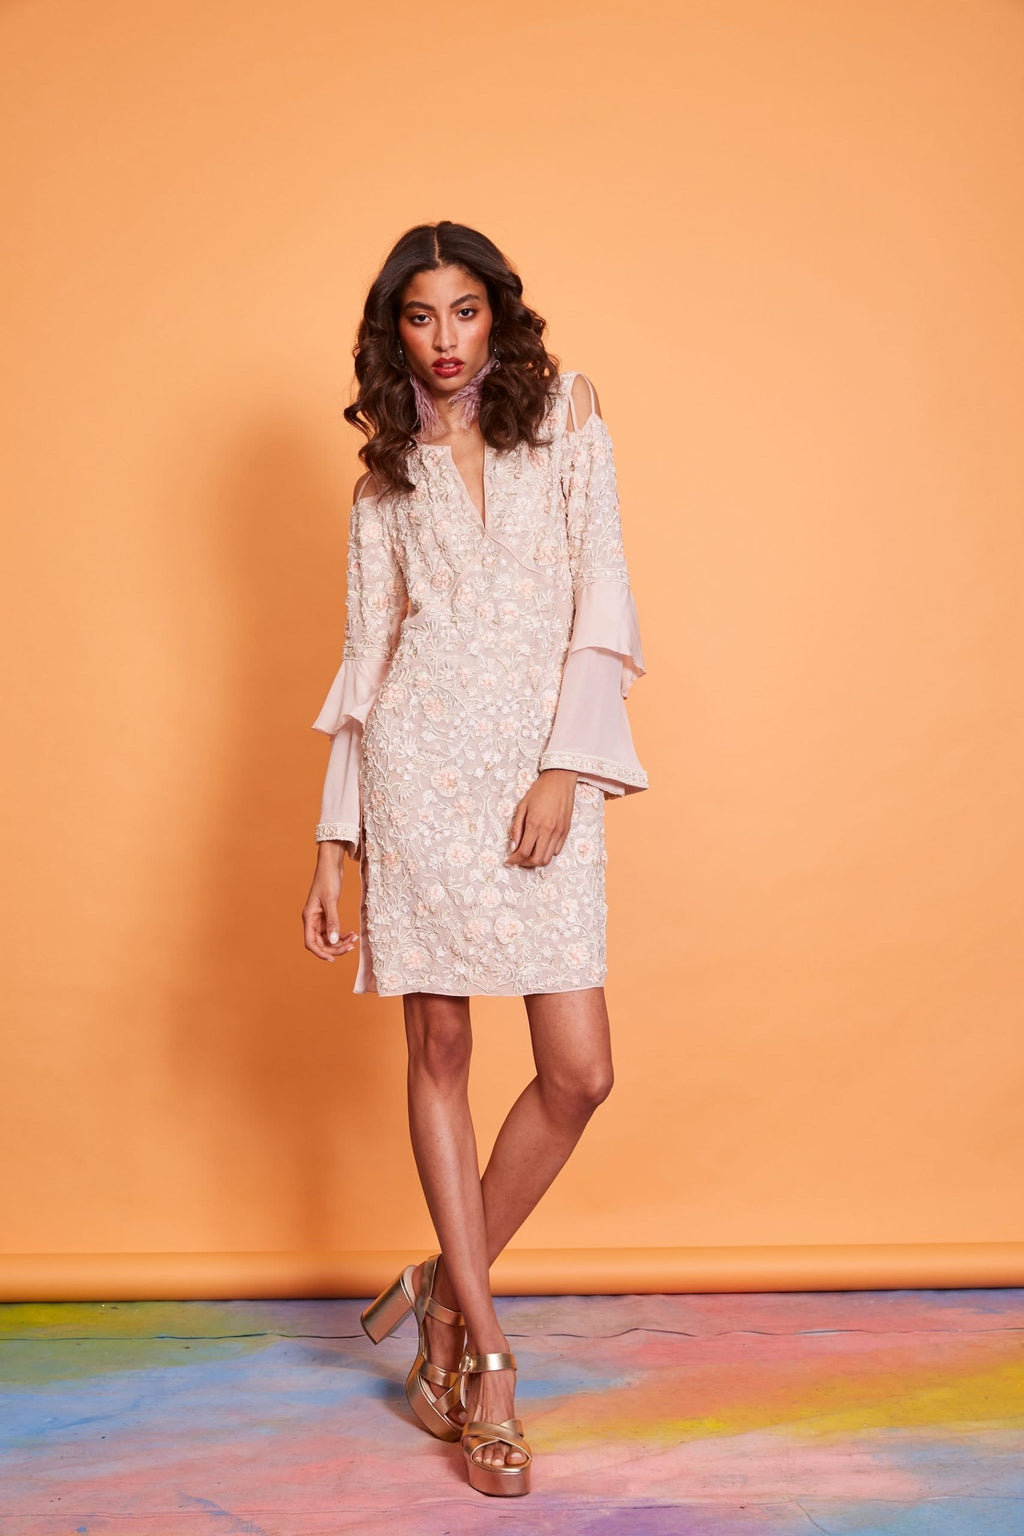 Lavanya Coodly Women - Apparel - Dresses - Cocktail XS / Blush Lavanya Coodly Women's Pale Blush Silk Above The Knee Morgan Dress with Exquisite Hand Beaded Detail & Tiered Sleeves